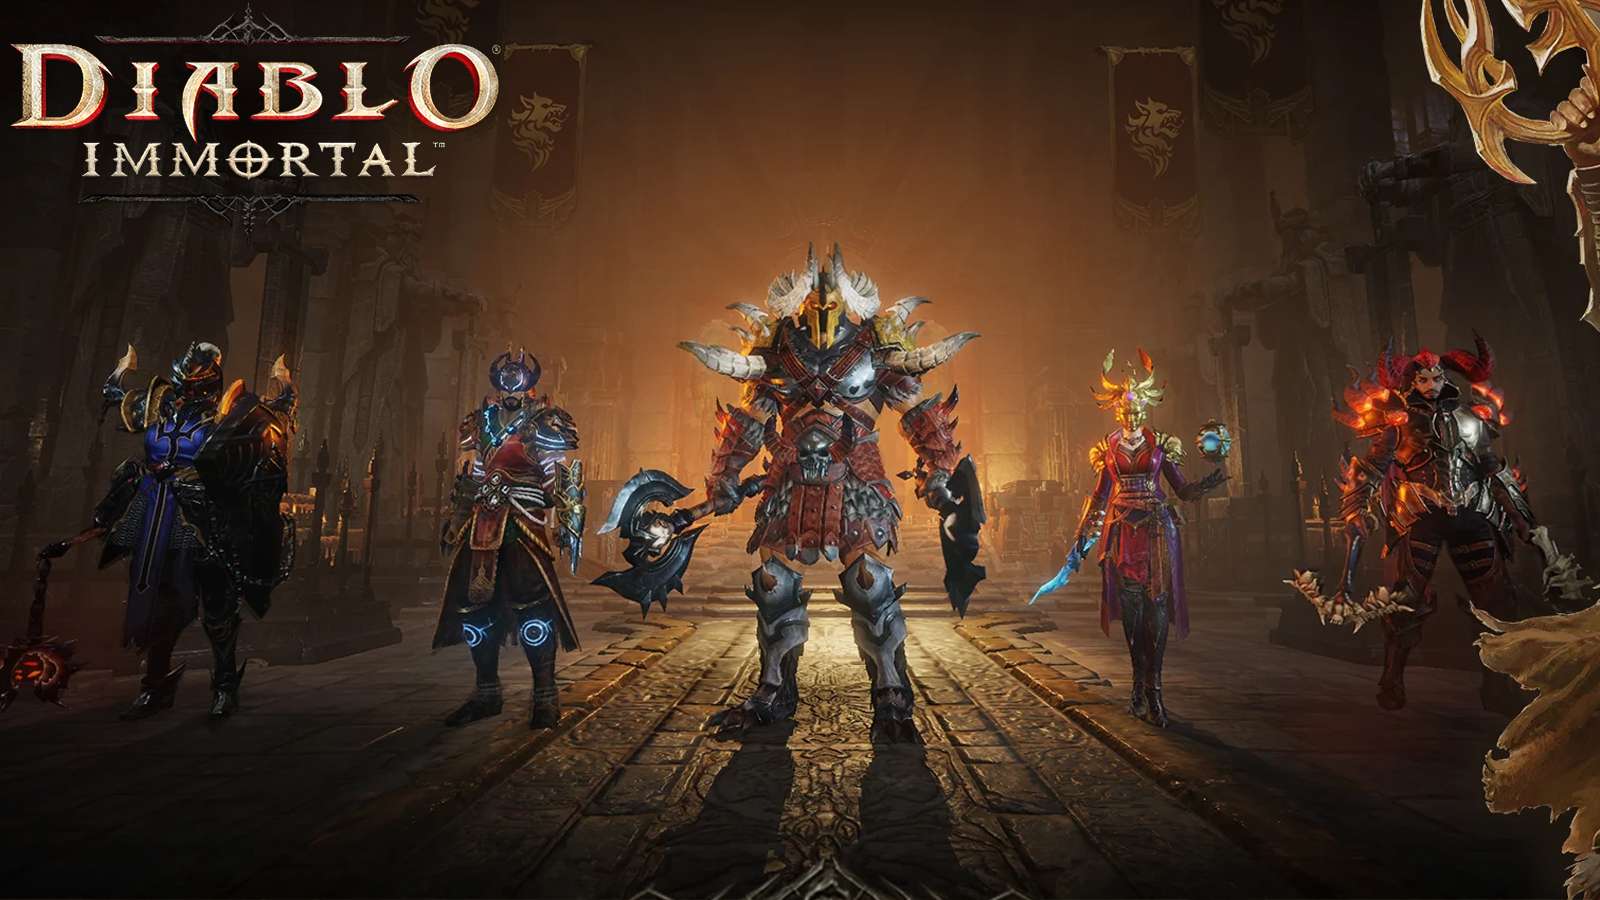 Some of the featured characters in Diablo Immortal